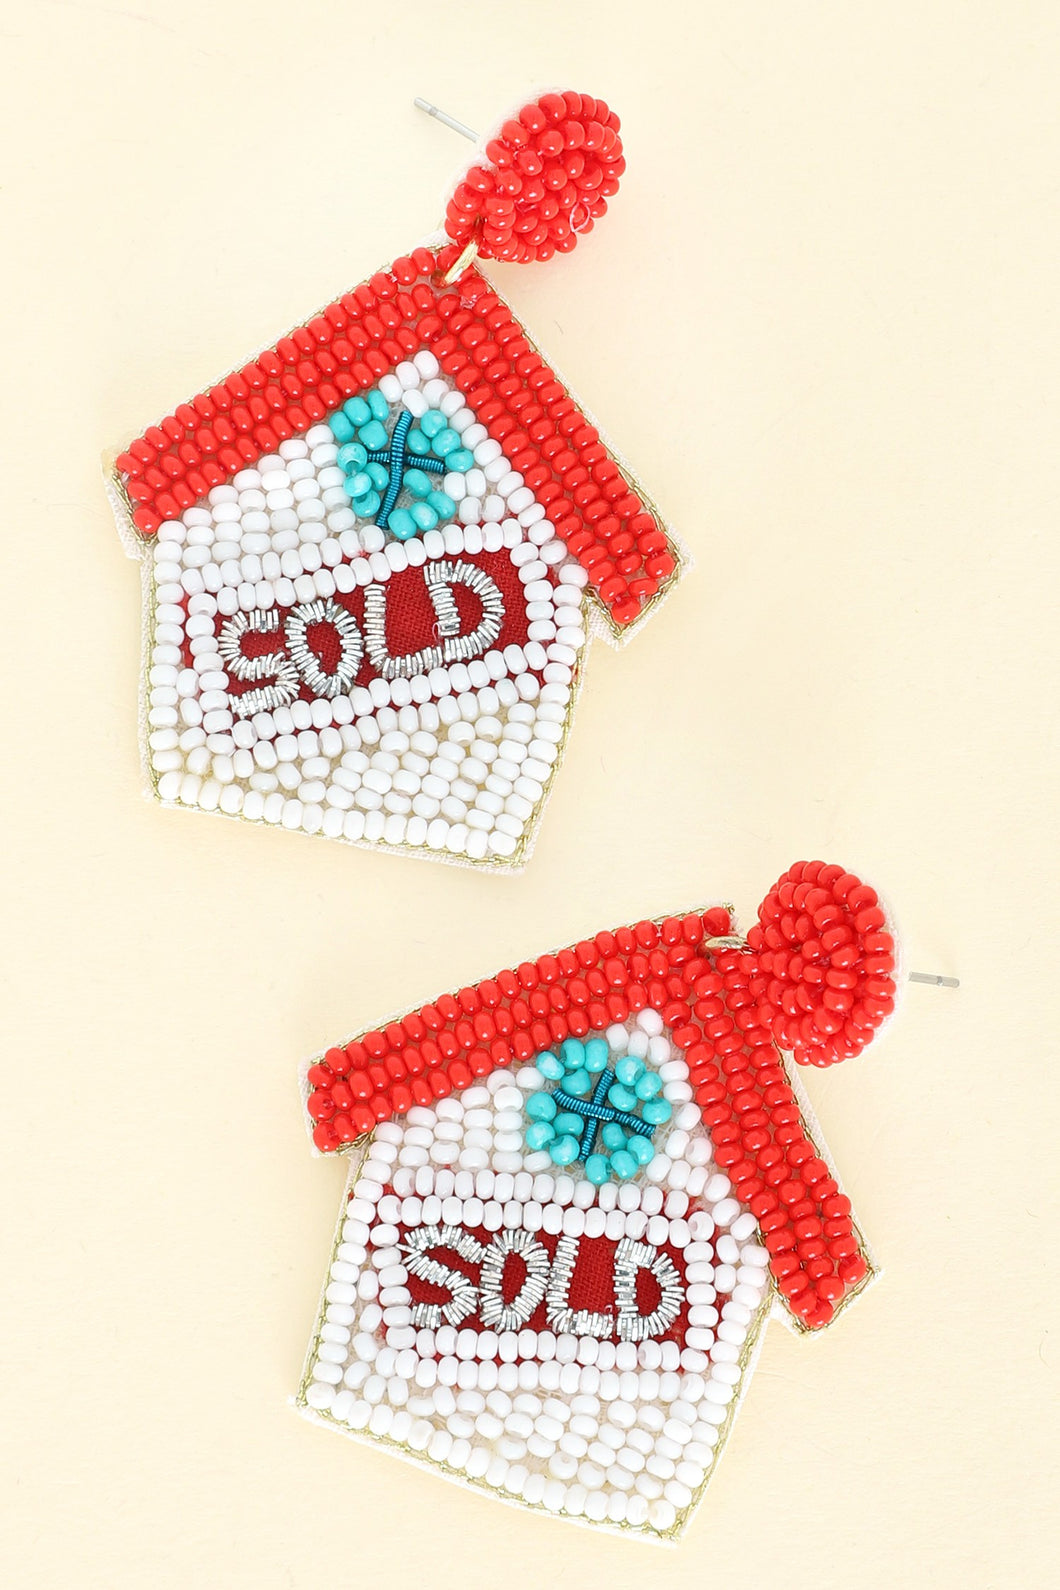 Real Estate Sold House Earrings